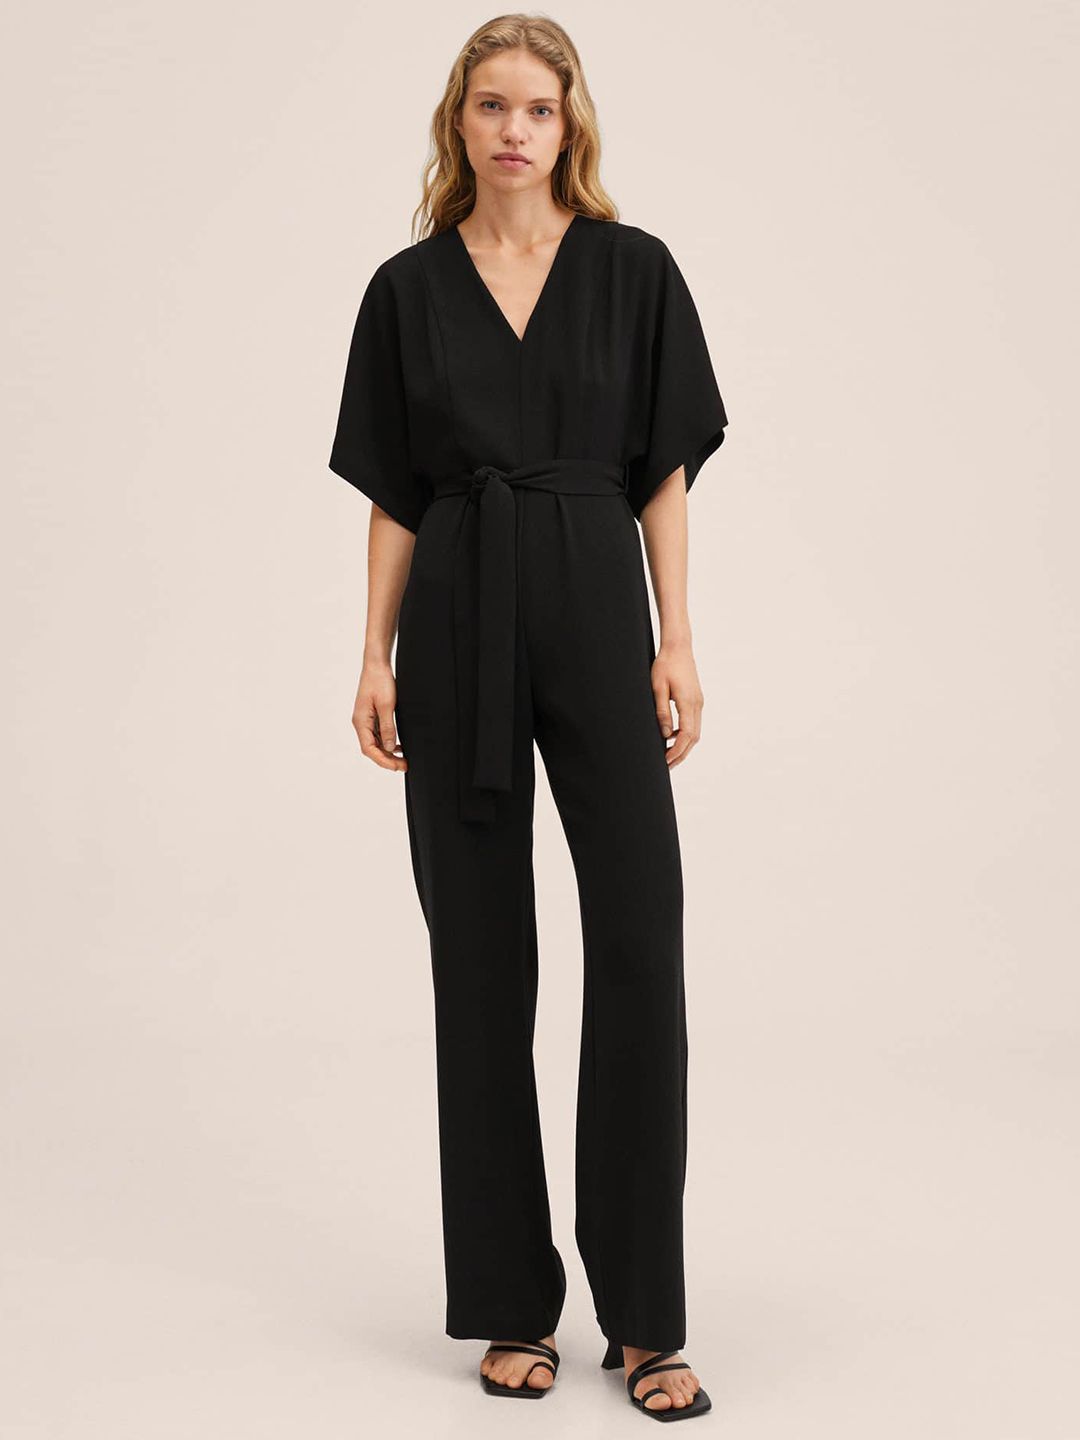 MANGO Black Basic Jumpsuit With a Belt Price in India